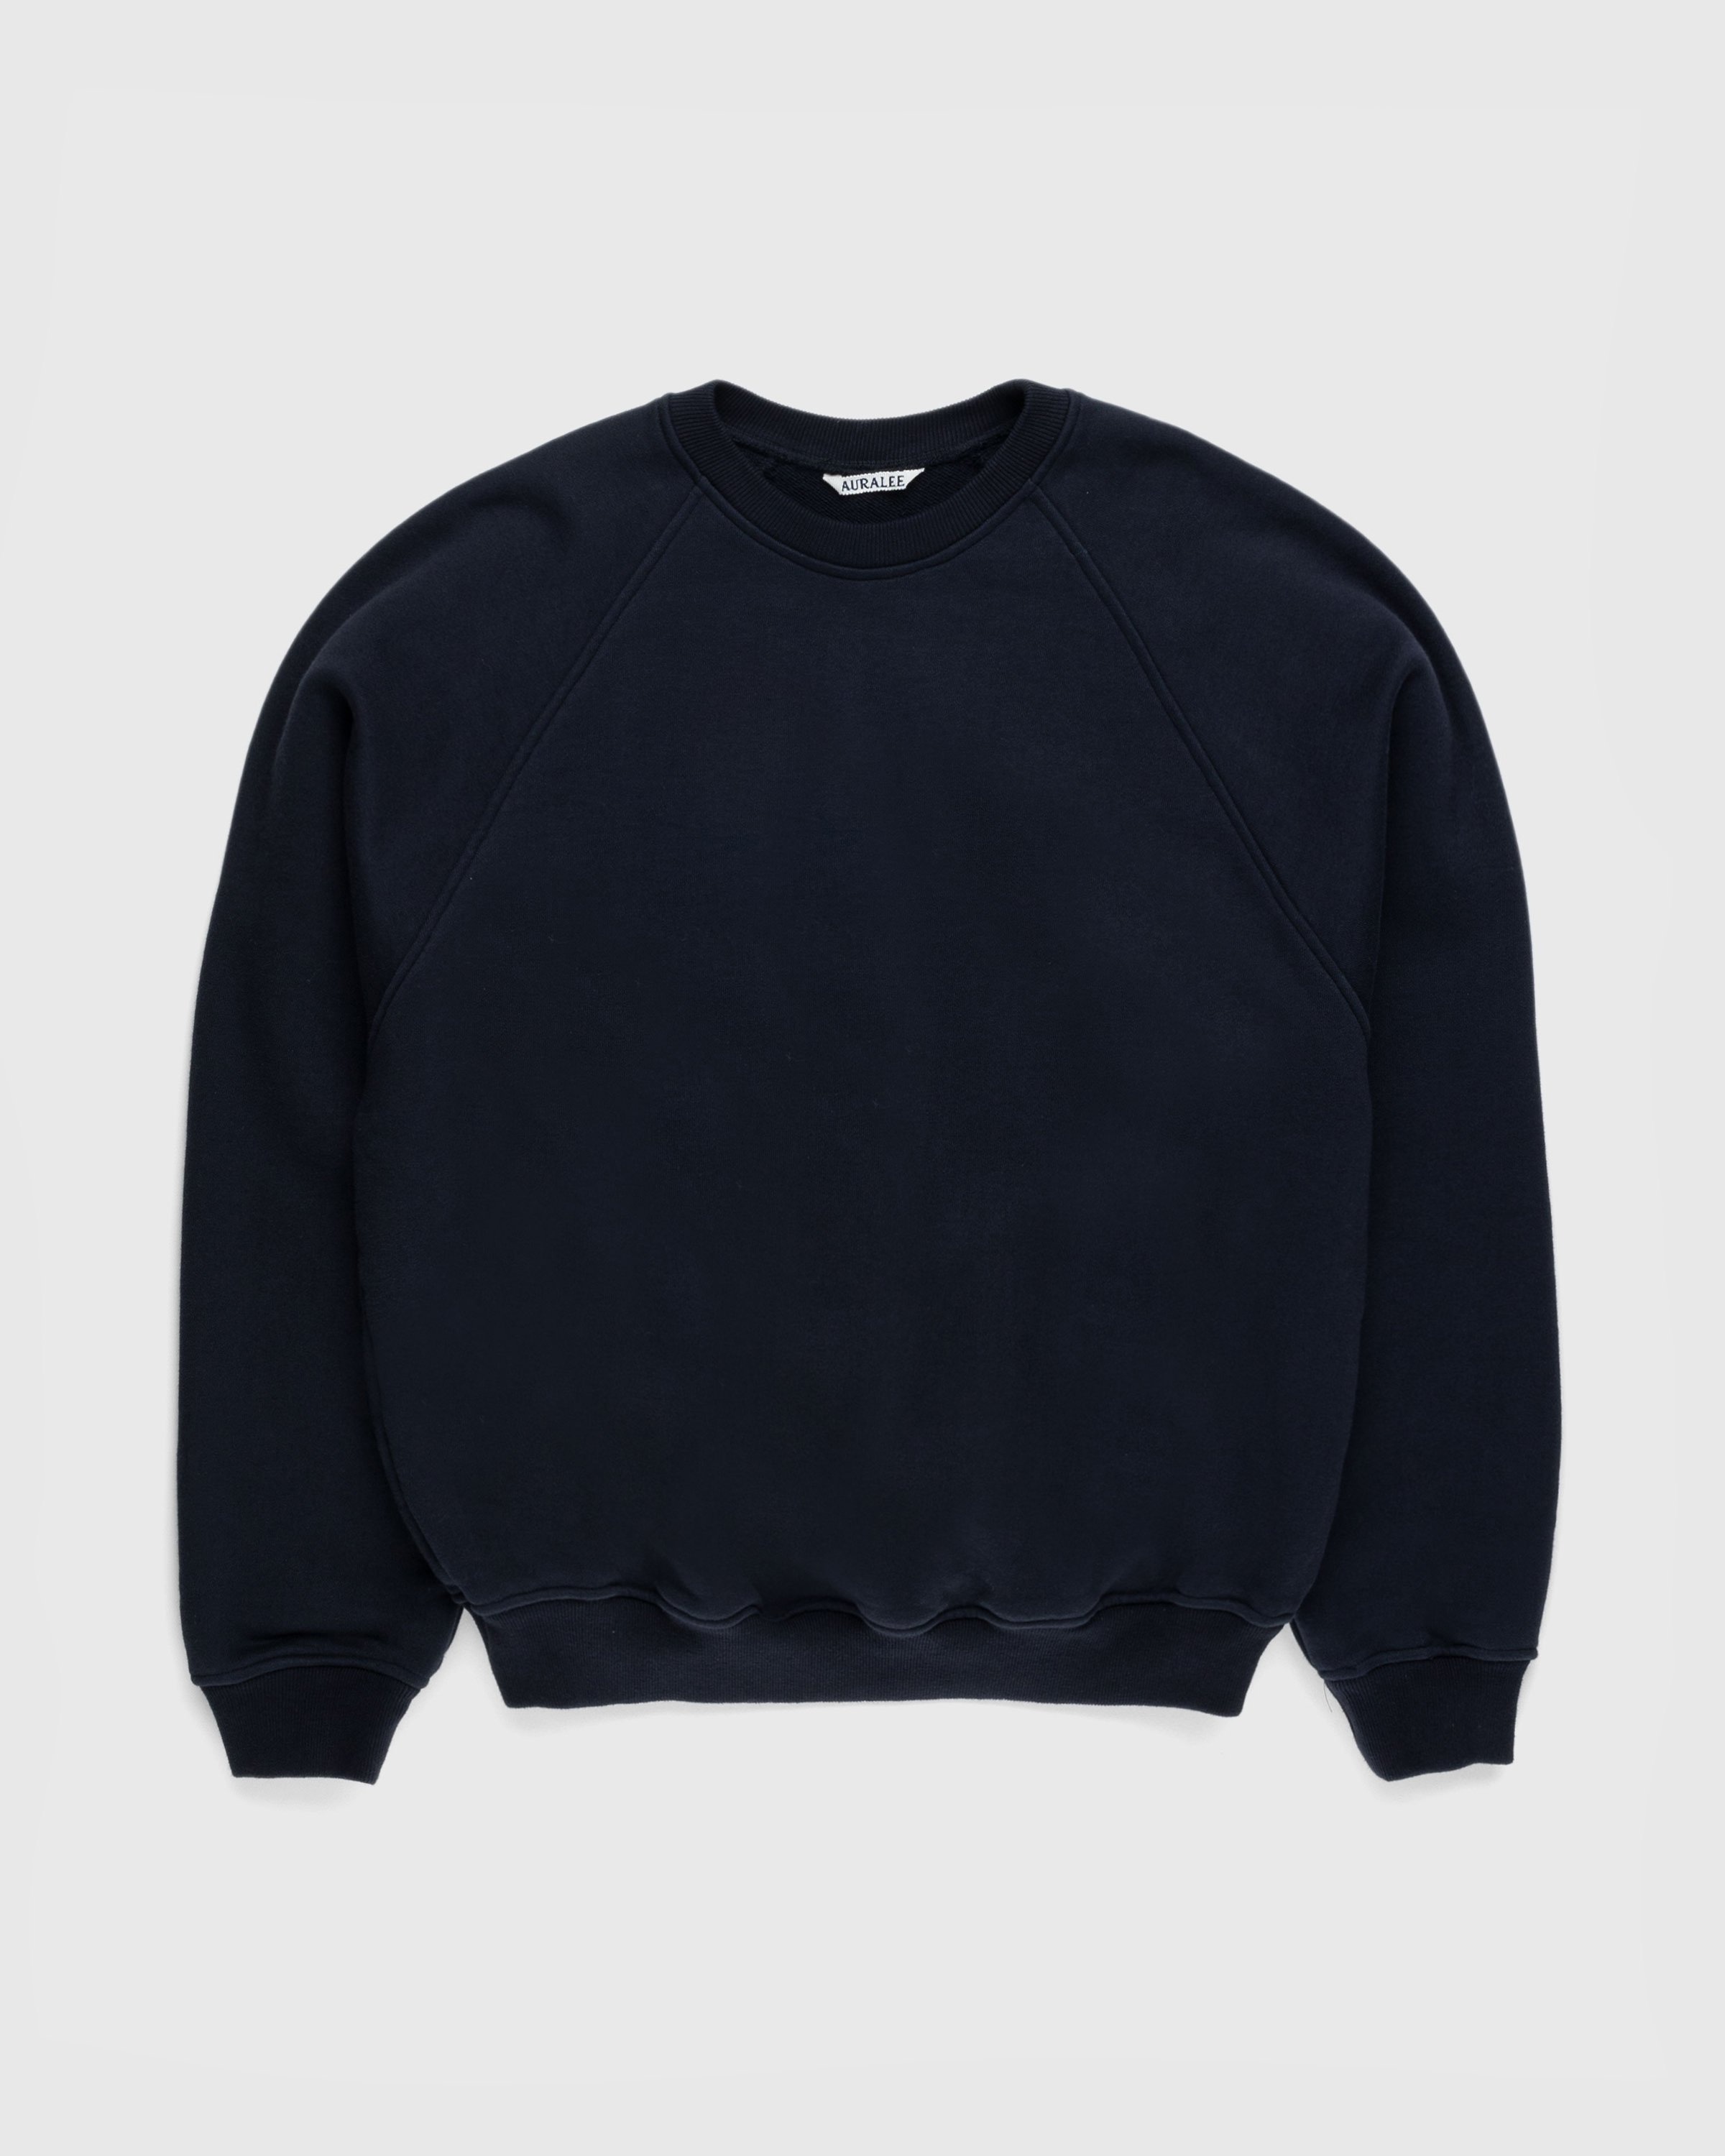 Auralee - Smooth Soft Sweat Pullover Black - Clothing - Black - Image 1